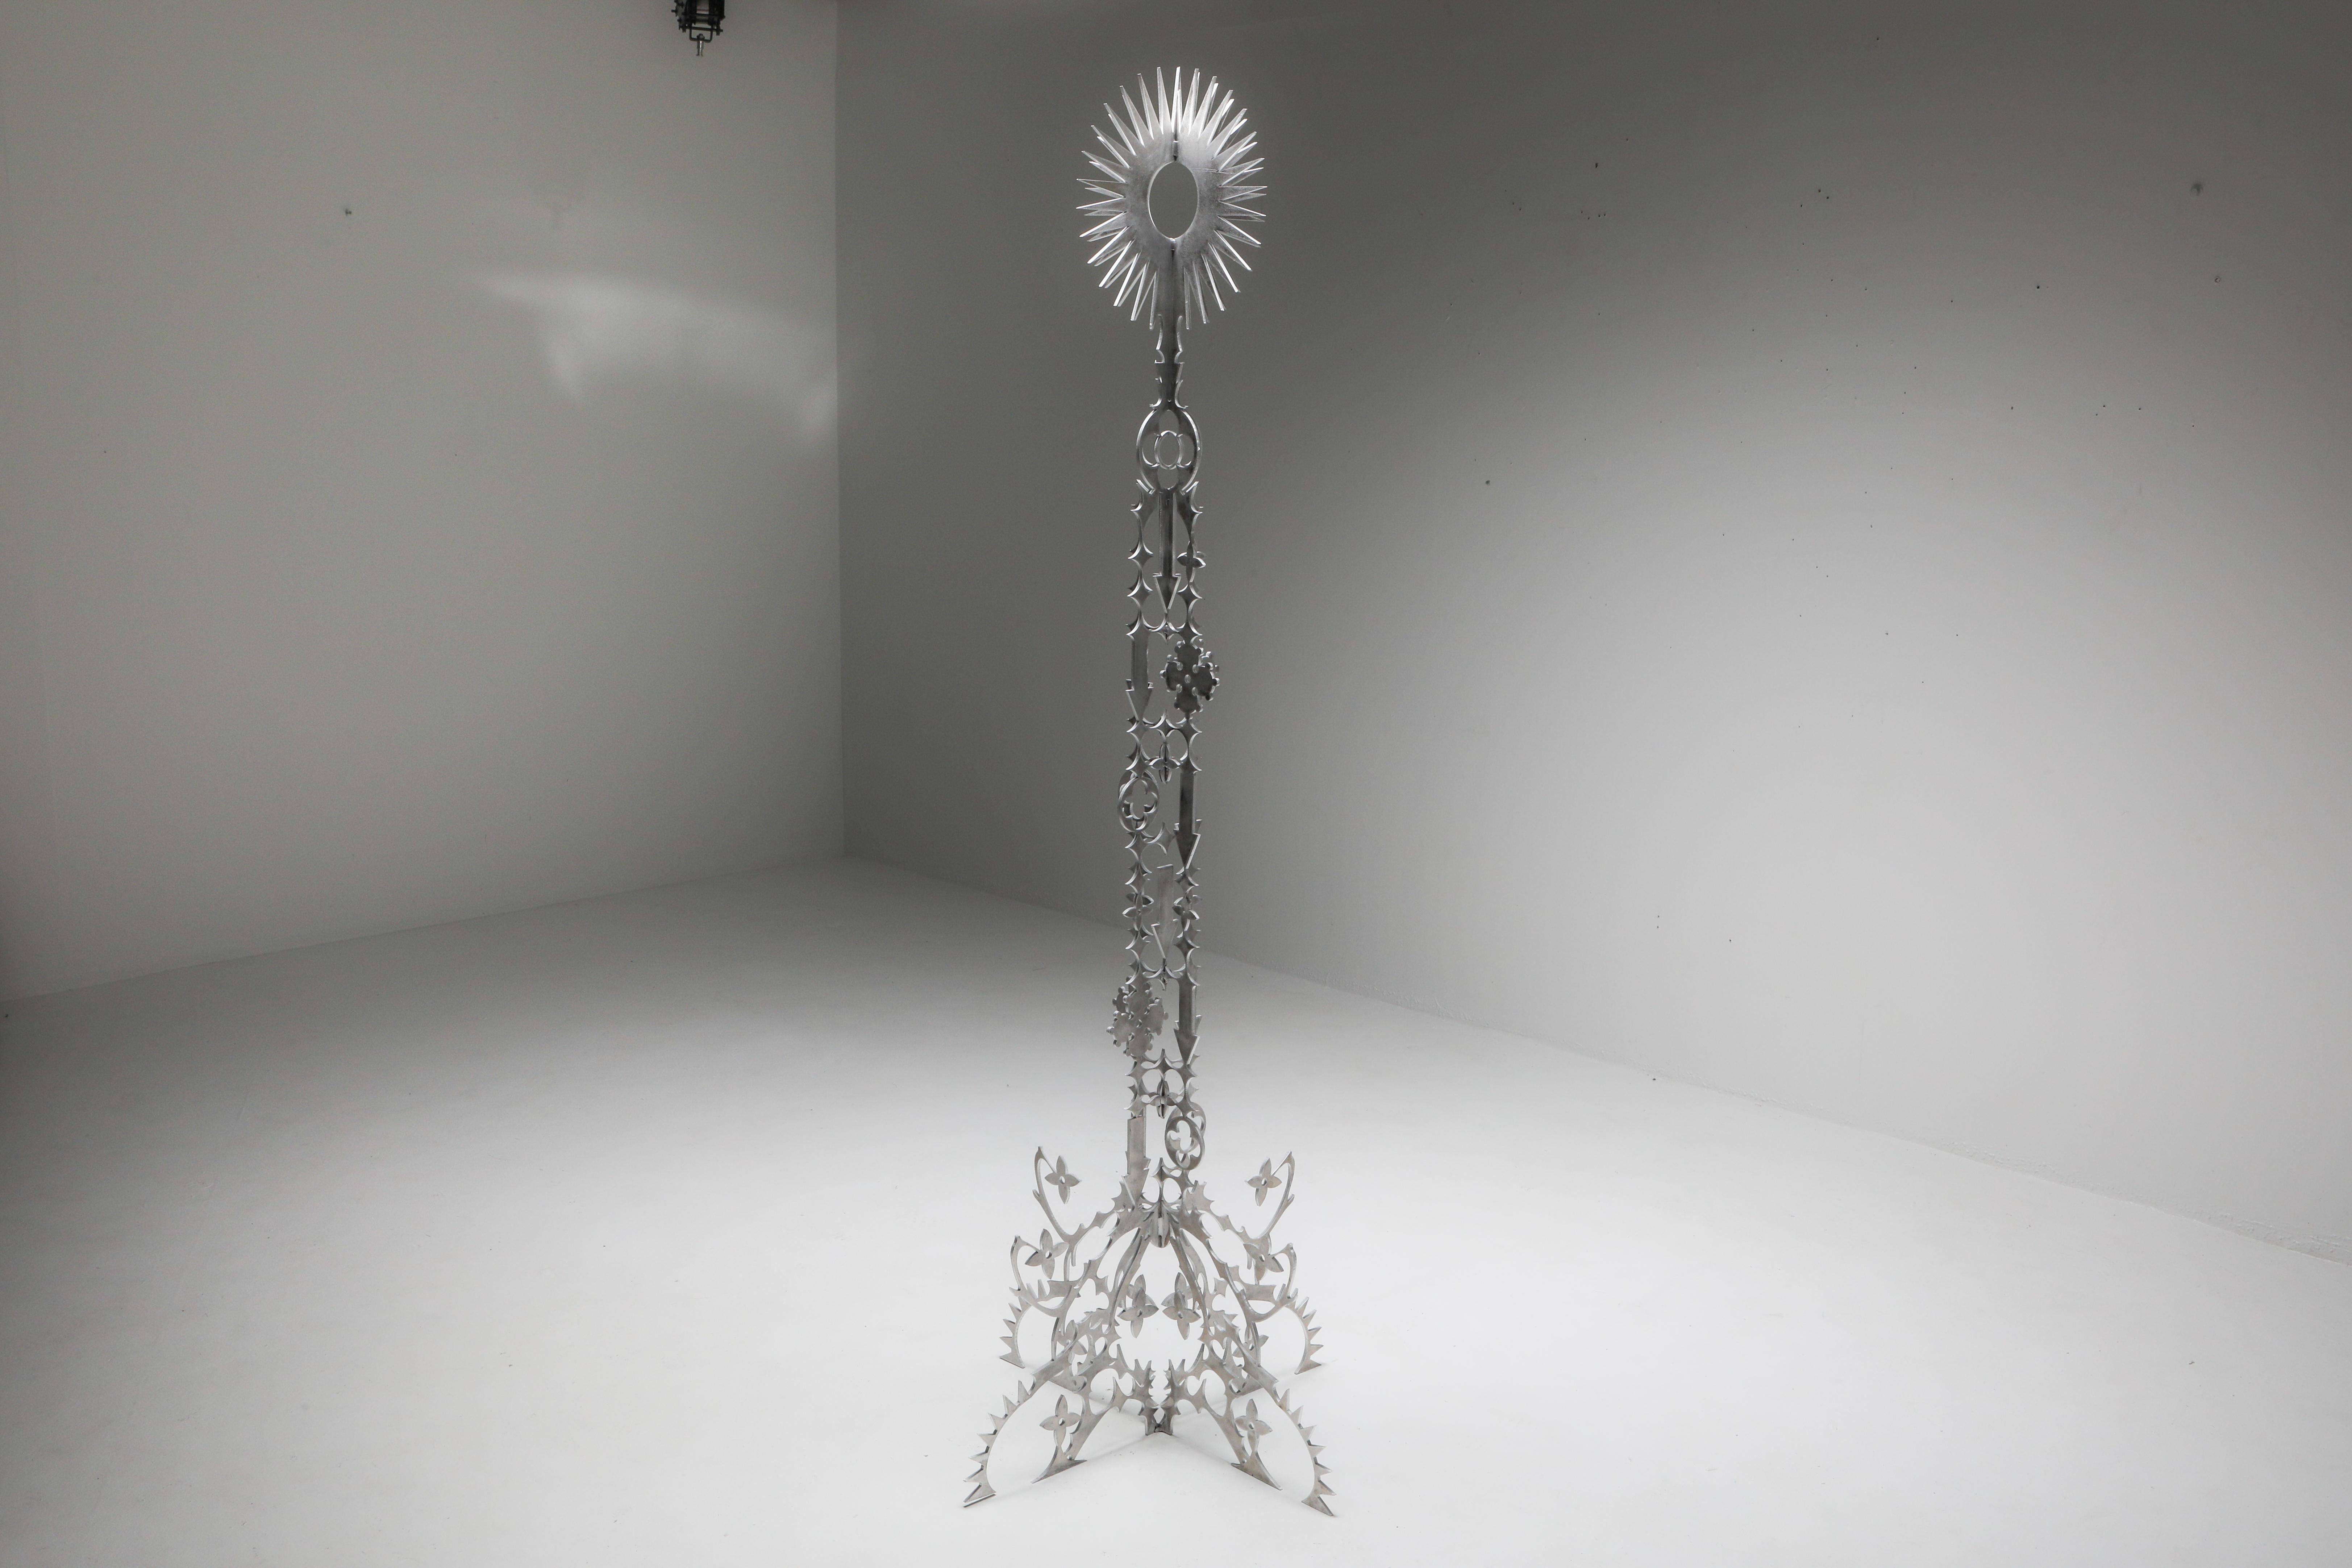 ‘Ornamentum 3’ (floor lamp inspired) sculpture made from 6mm lasered aluminium. Designed as part of a collaborative project between spatial designer Orson Van Beek and fashion designer Quinten Mestdagh, consisting of three unique functional art